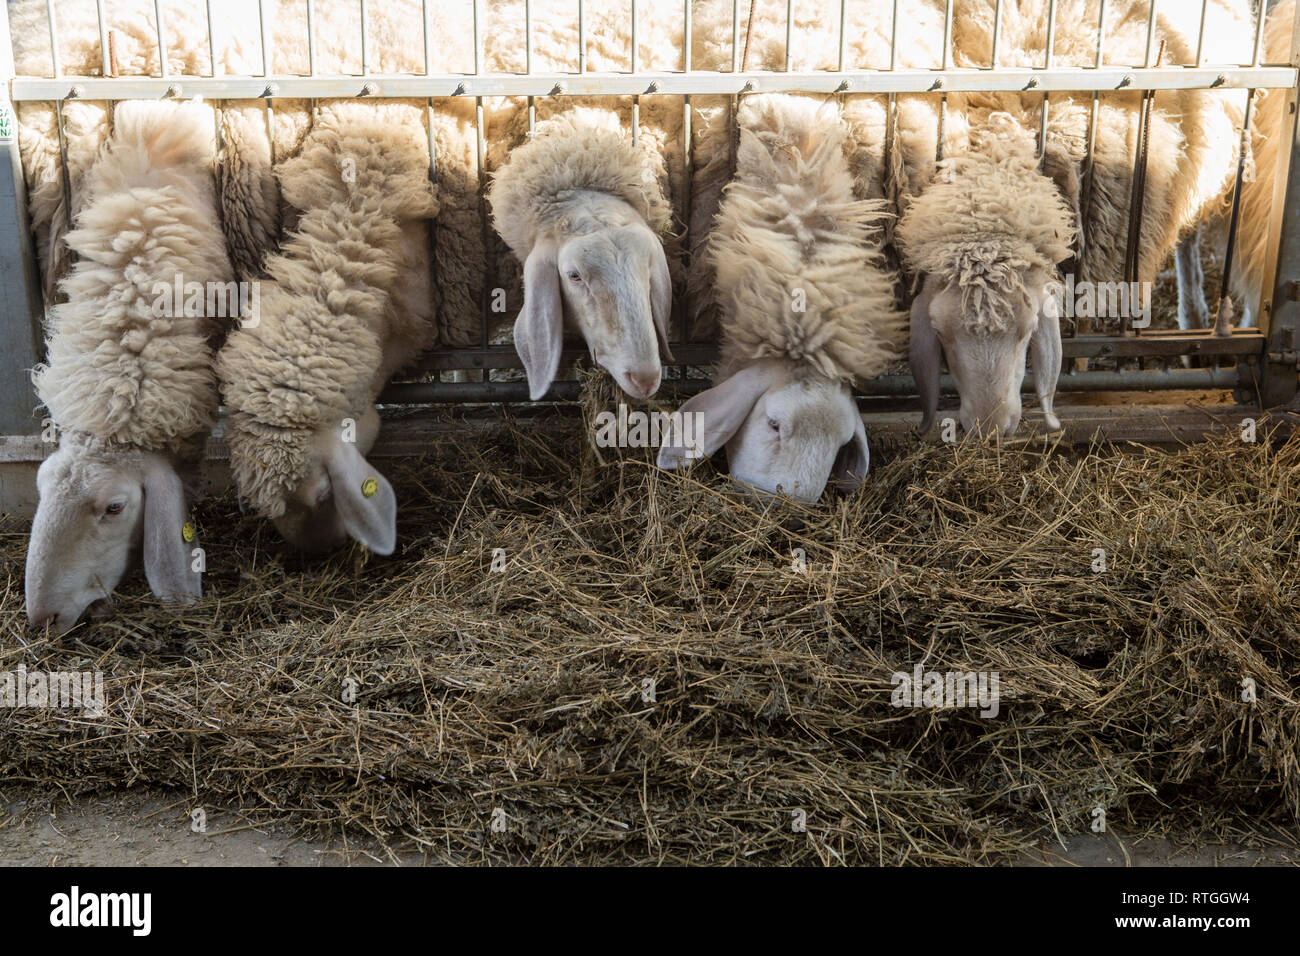 Sheeps in a enclosure Stock Photo